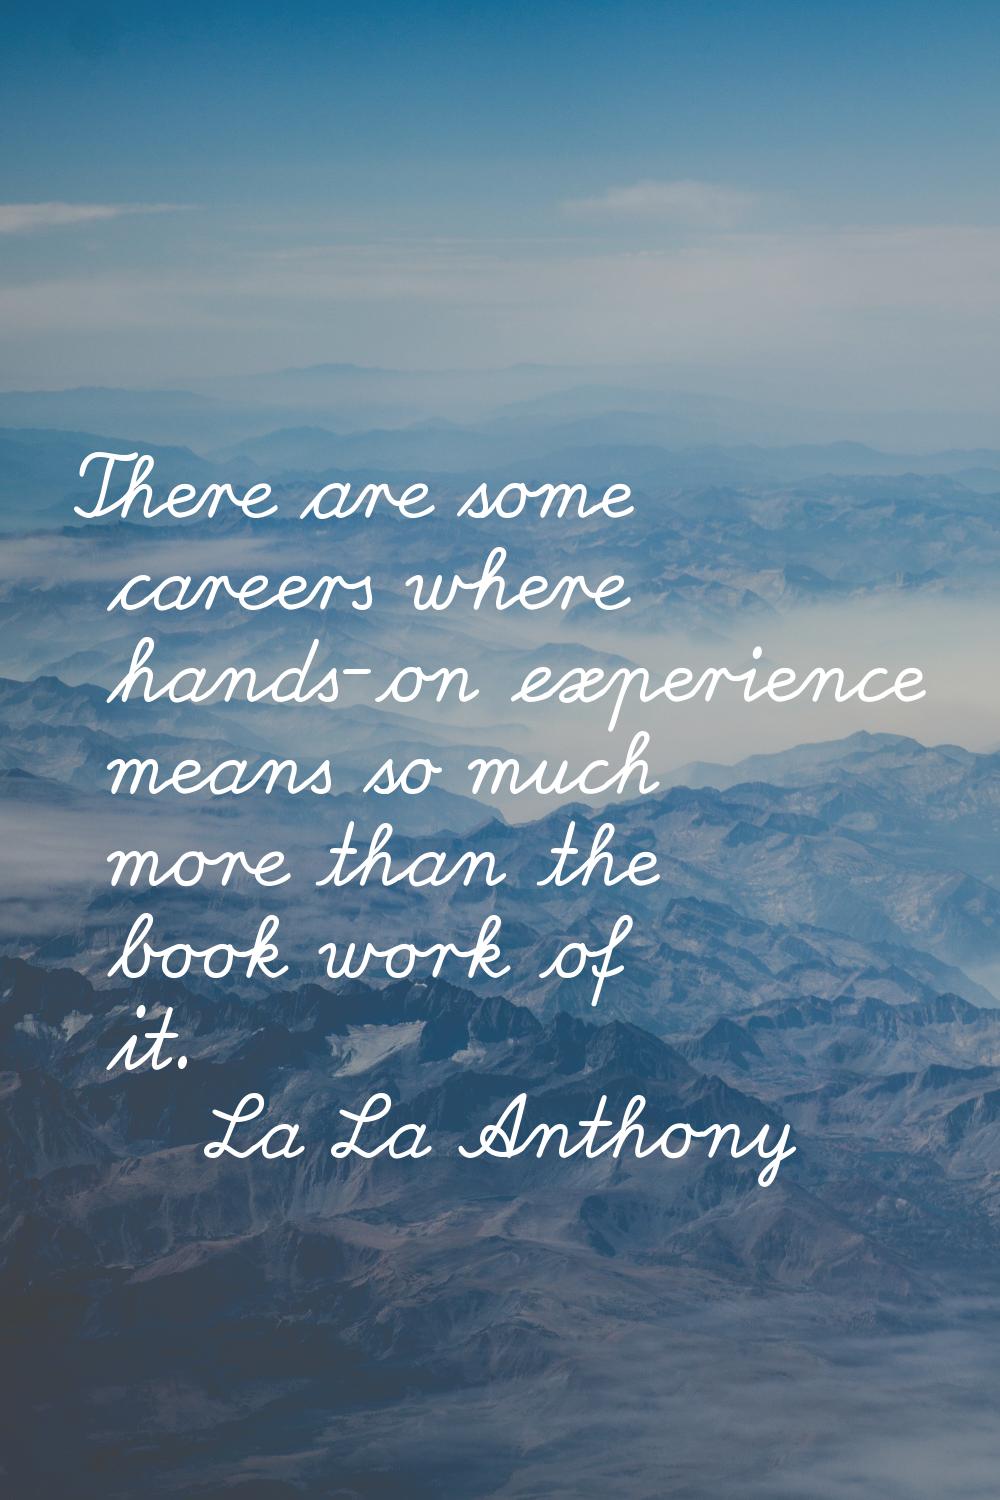 There are some careers where hands-on experience means so much more than the book work of it.